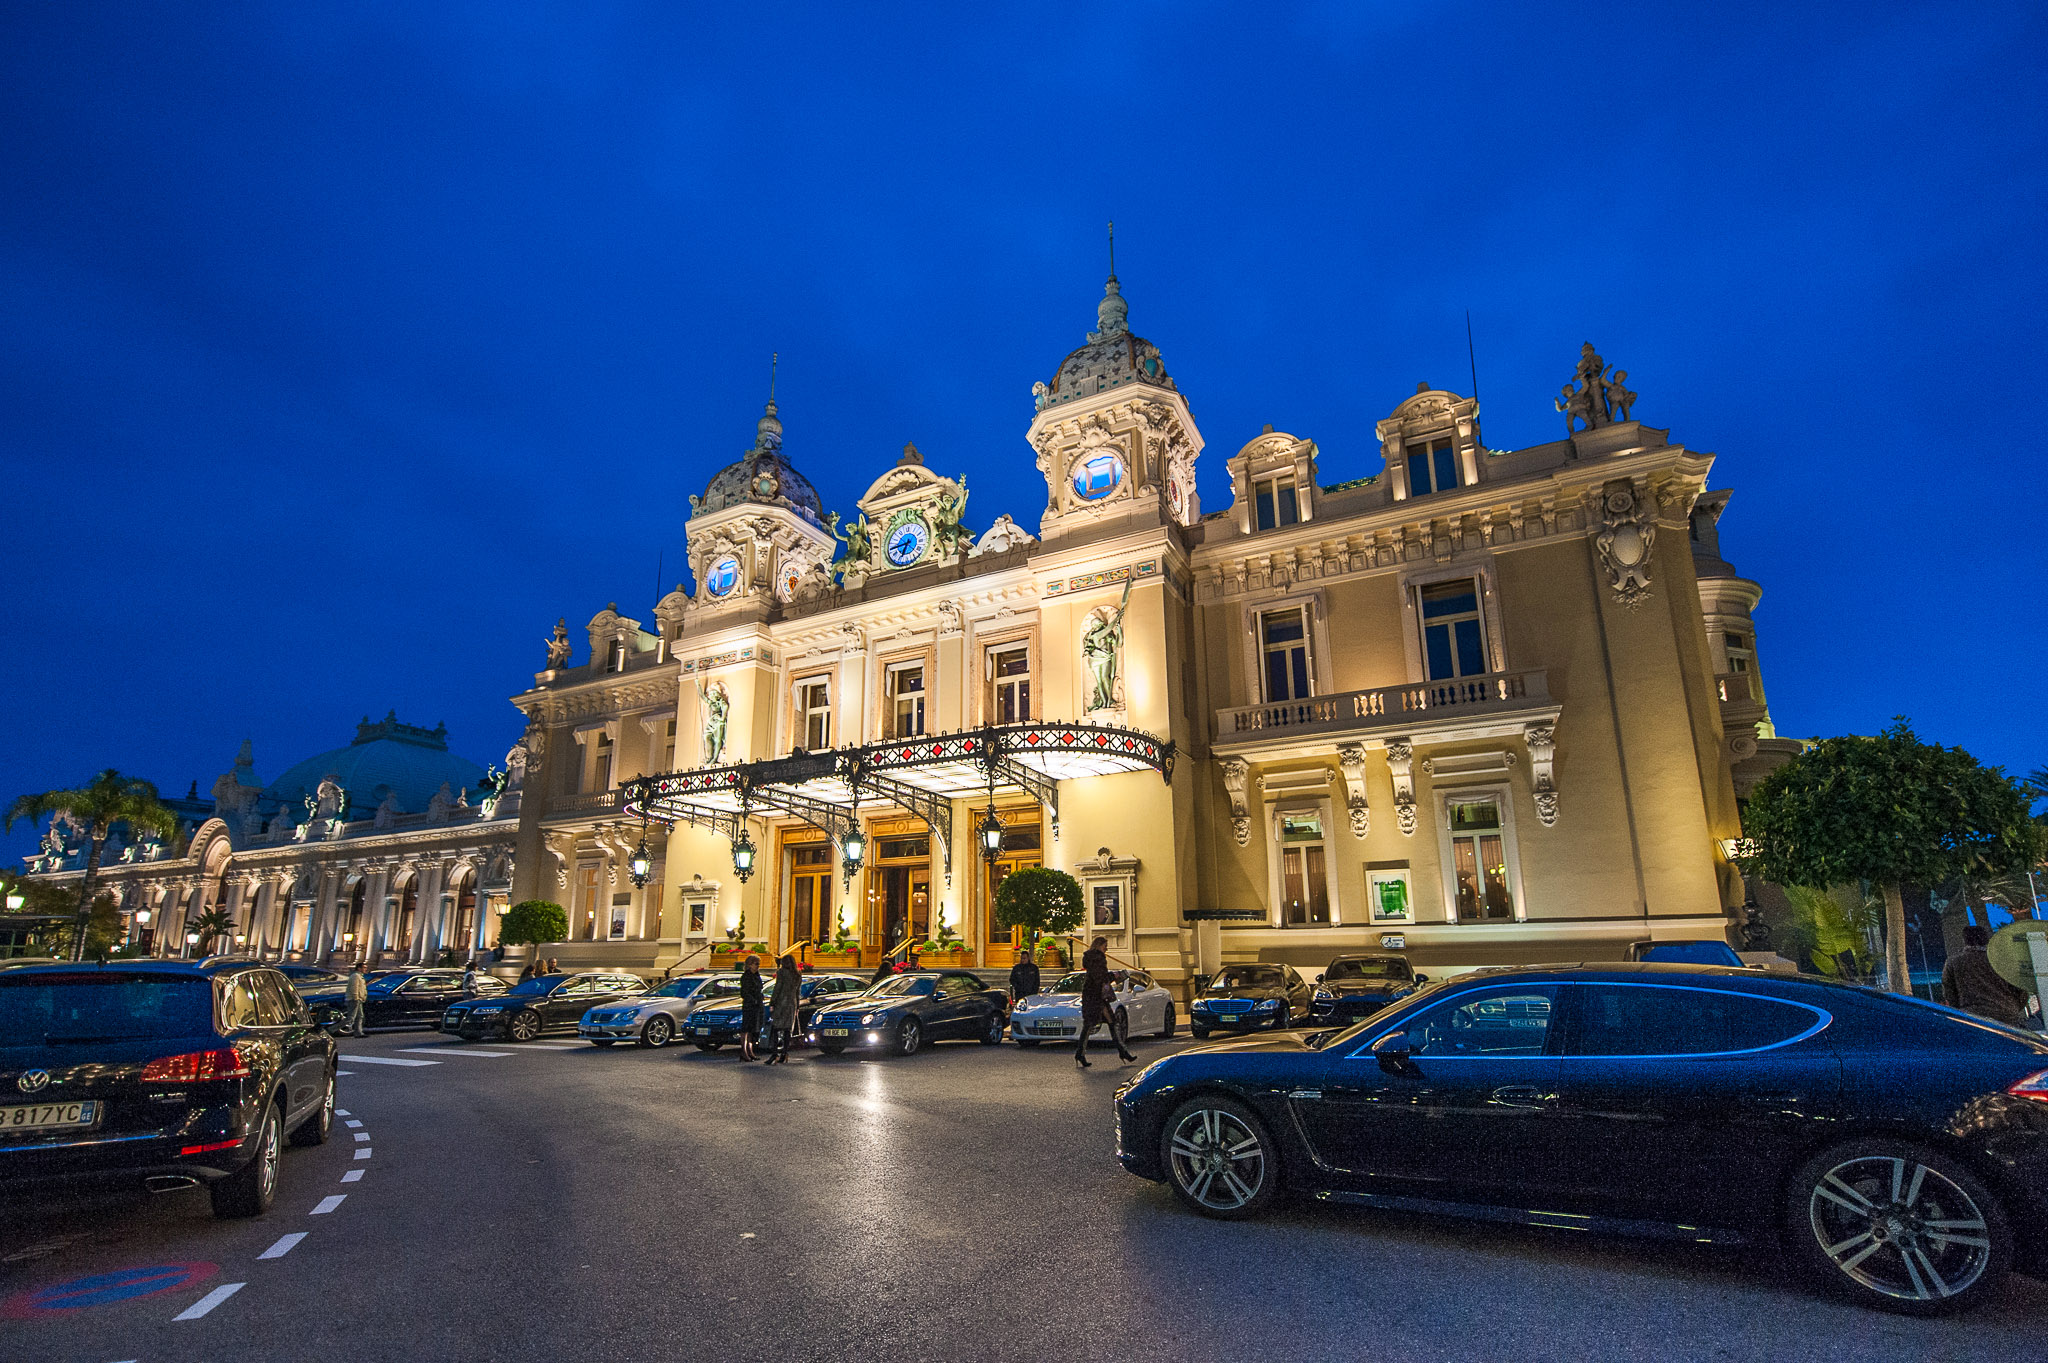 Casino of Monte Carlo by night © Casal Partiu - licence [CC BY-SA 2.0] from Wikimedia Commons